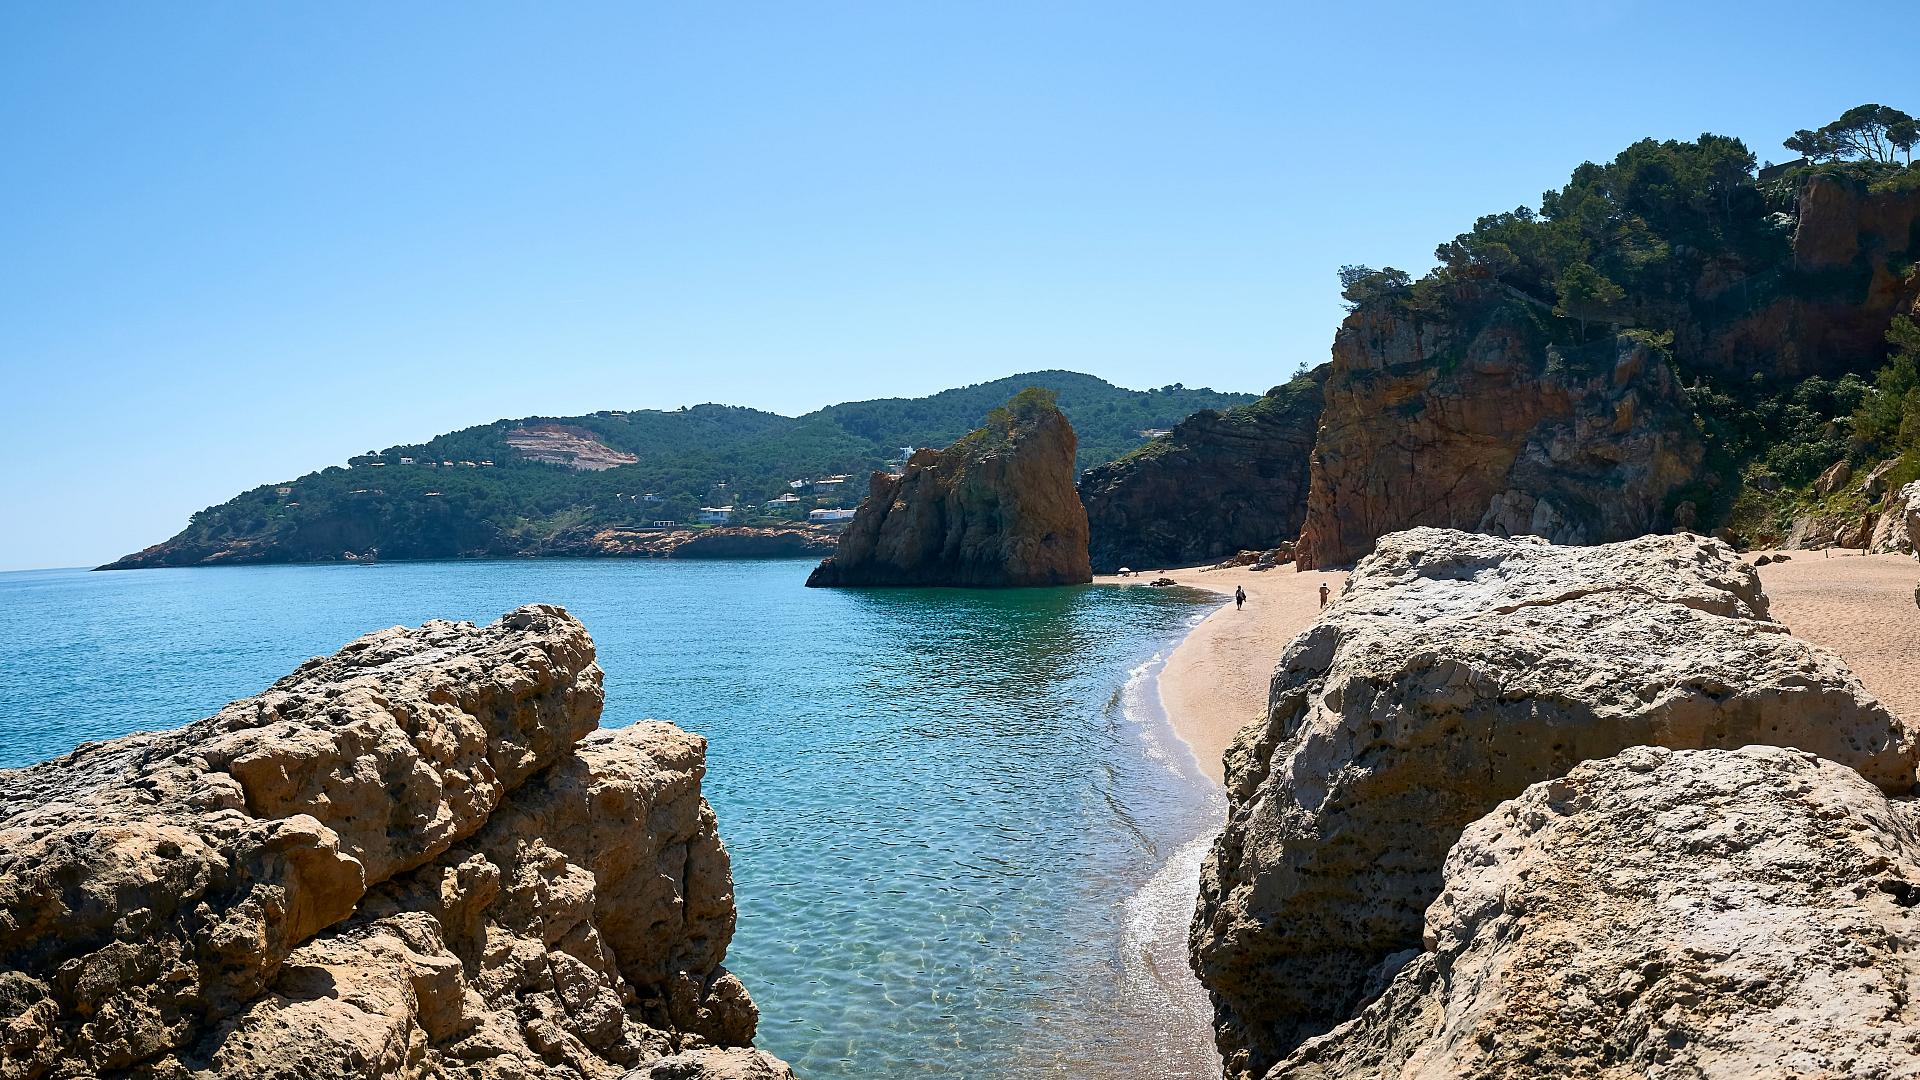 Beaches and coves of the Costa Brava